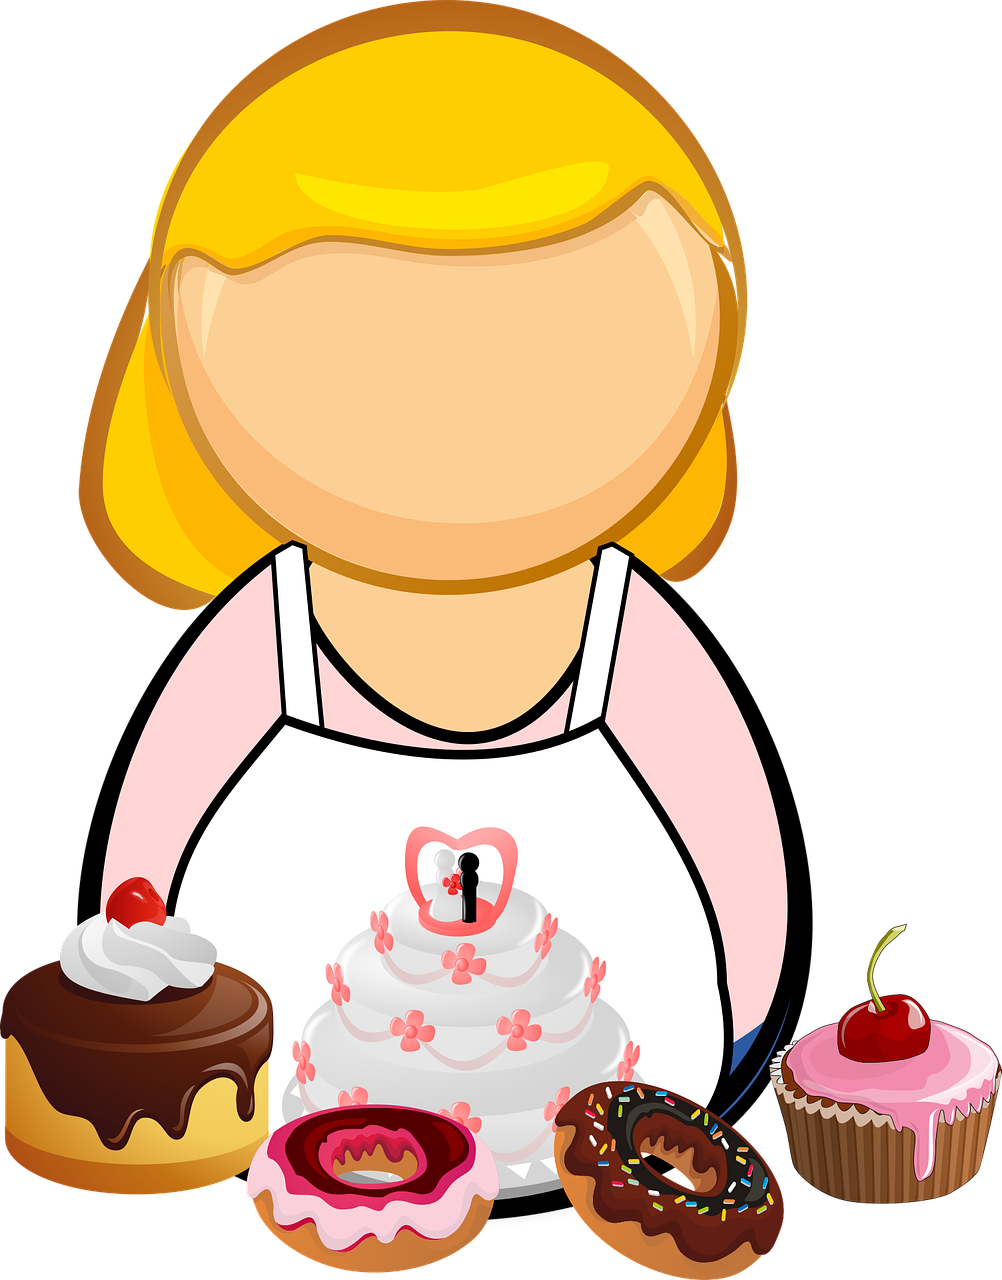 A Cartoon Of A Woman With A Variety Of Cupcakes